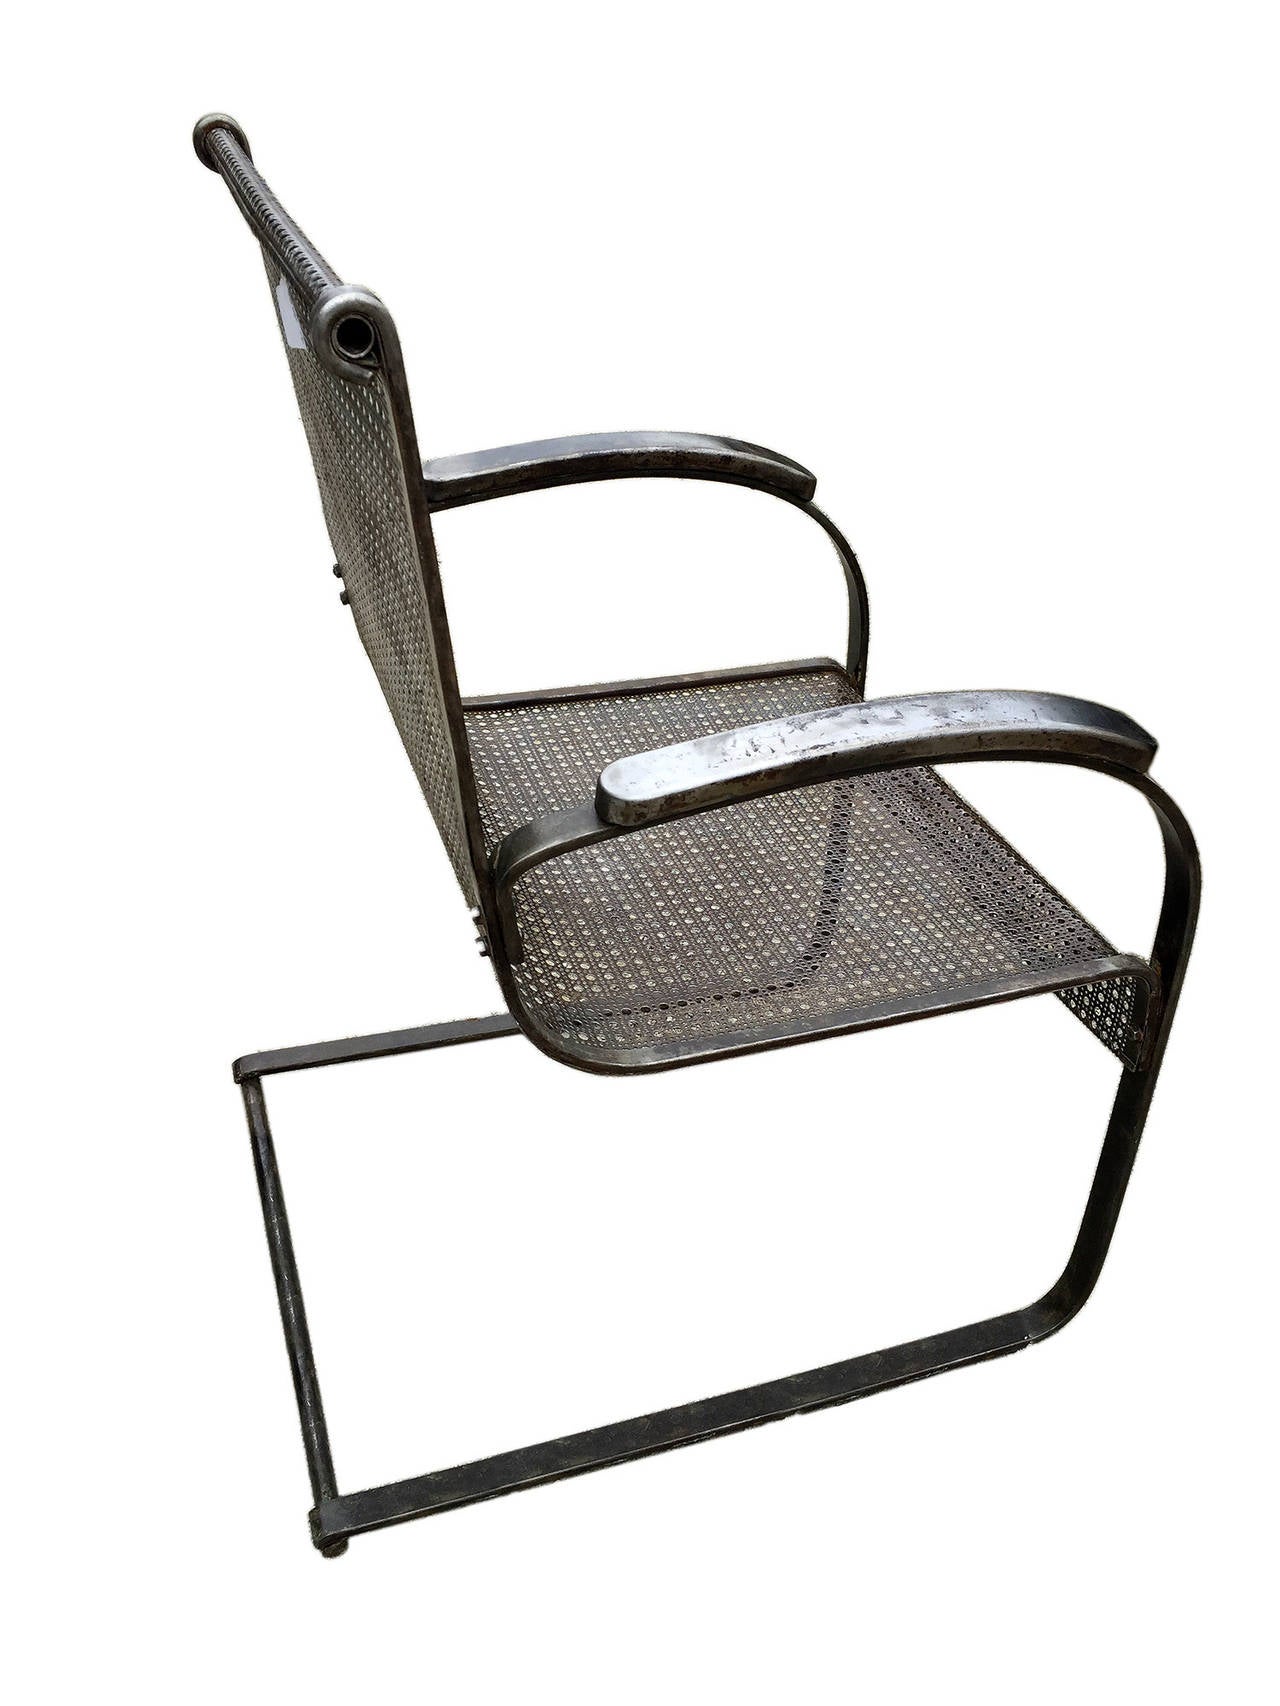 Unusual pair of iron armchairs with perforated sheet used as support for back and seat, equipped with armrests. USA, circa 1930.